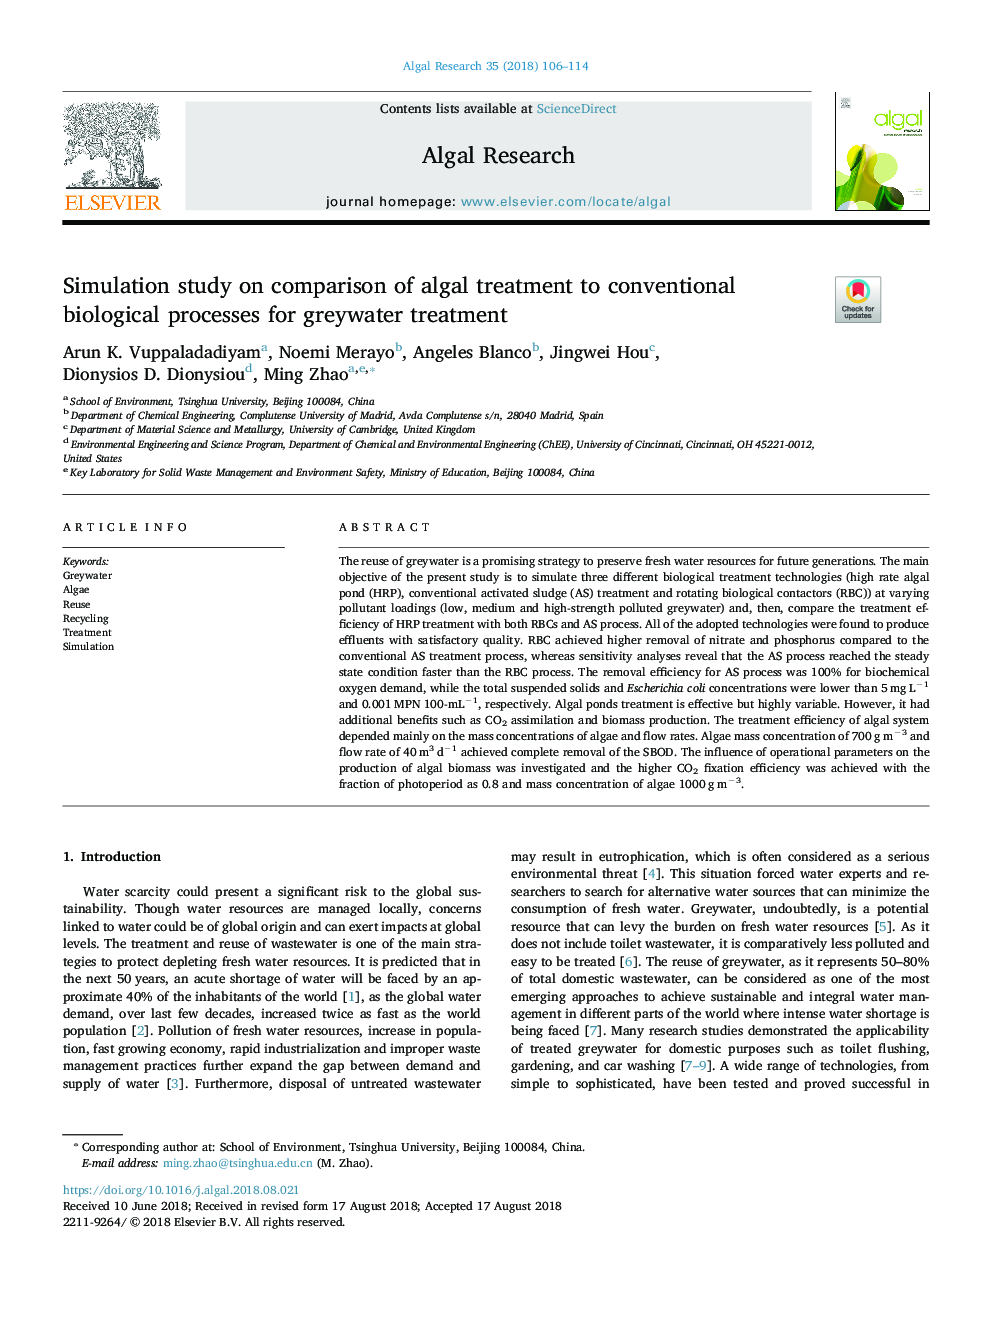 Simulation study on comparison of algal treatment to conventional biological processes for greywater treatment